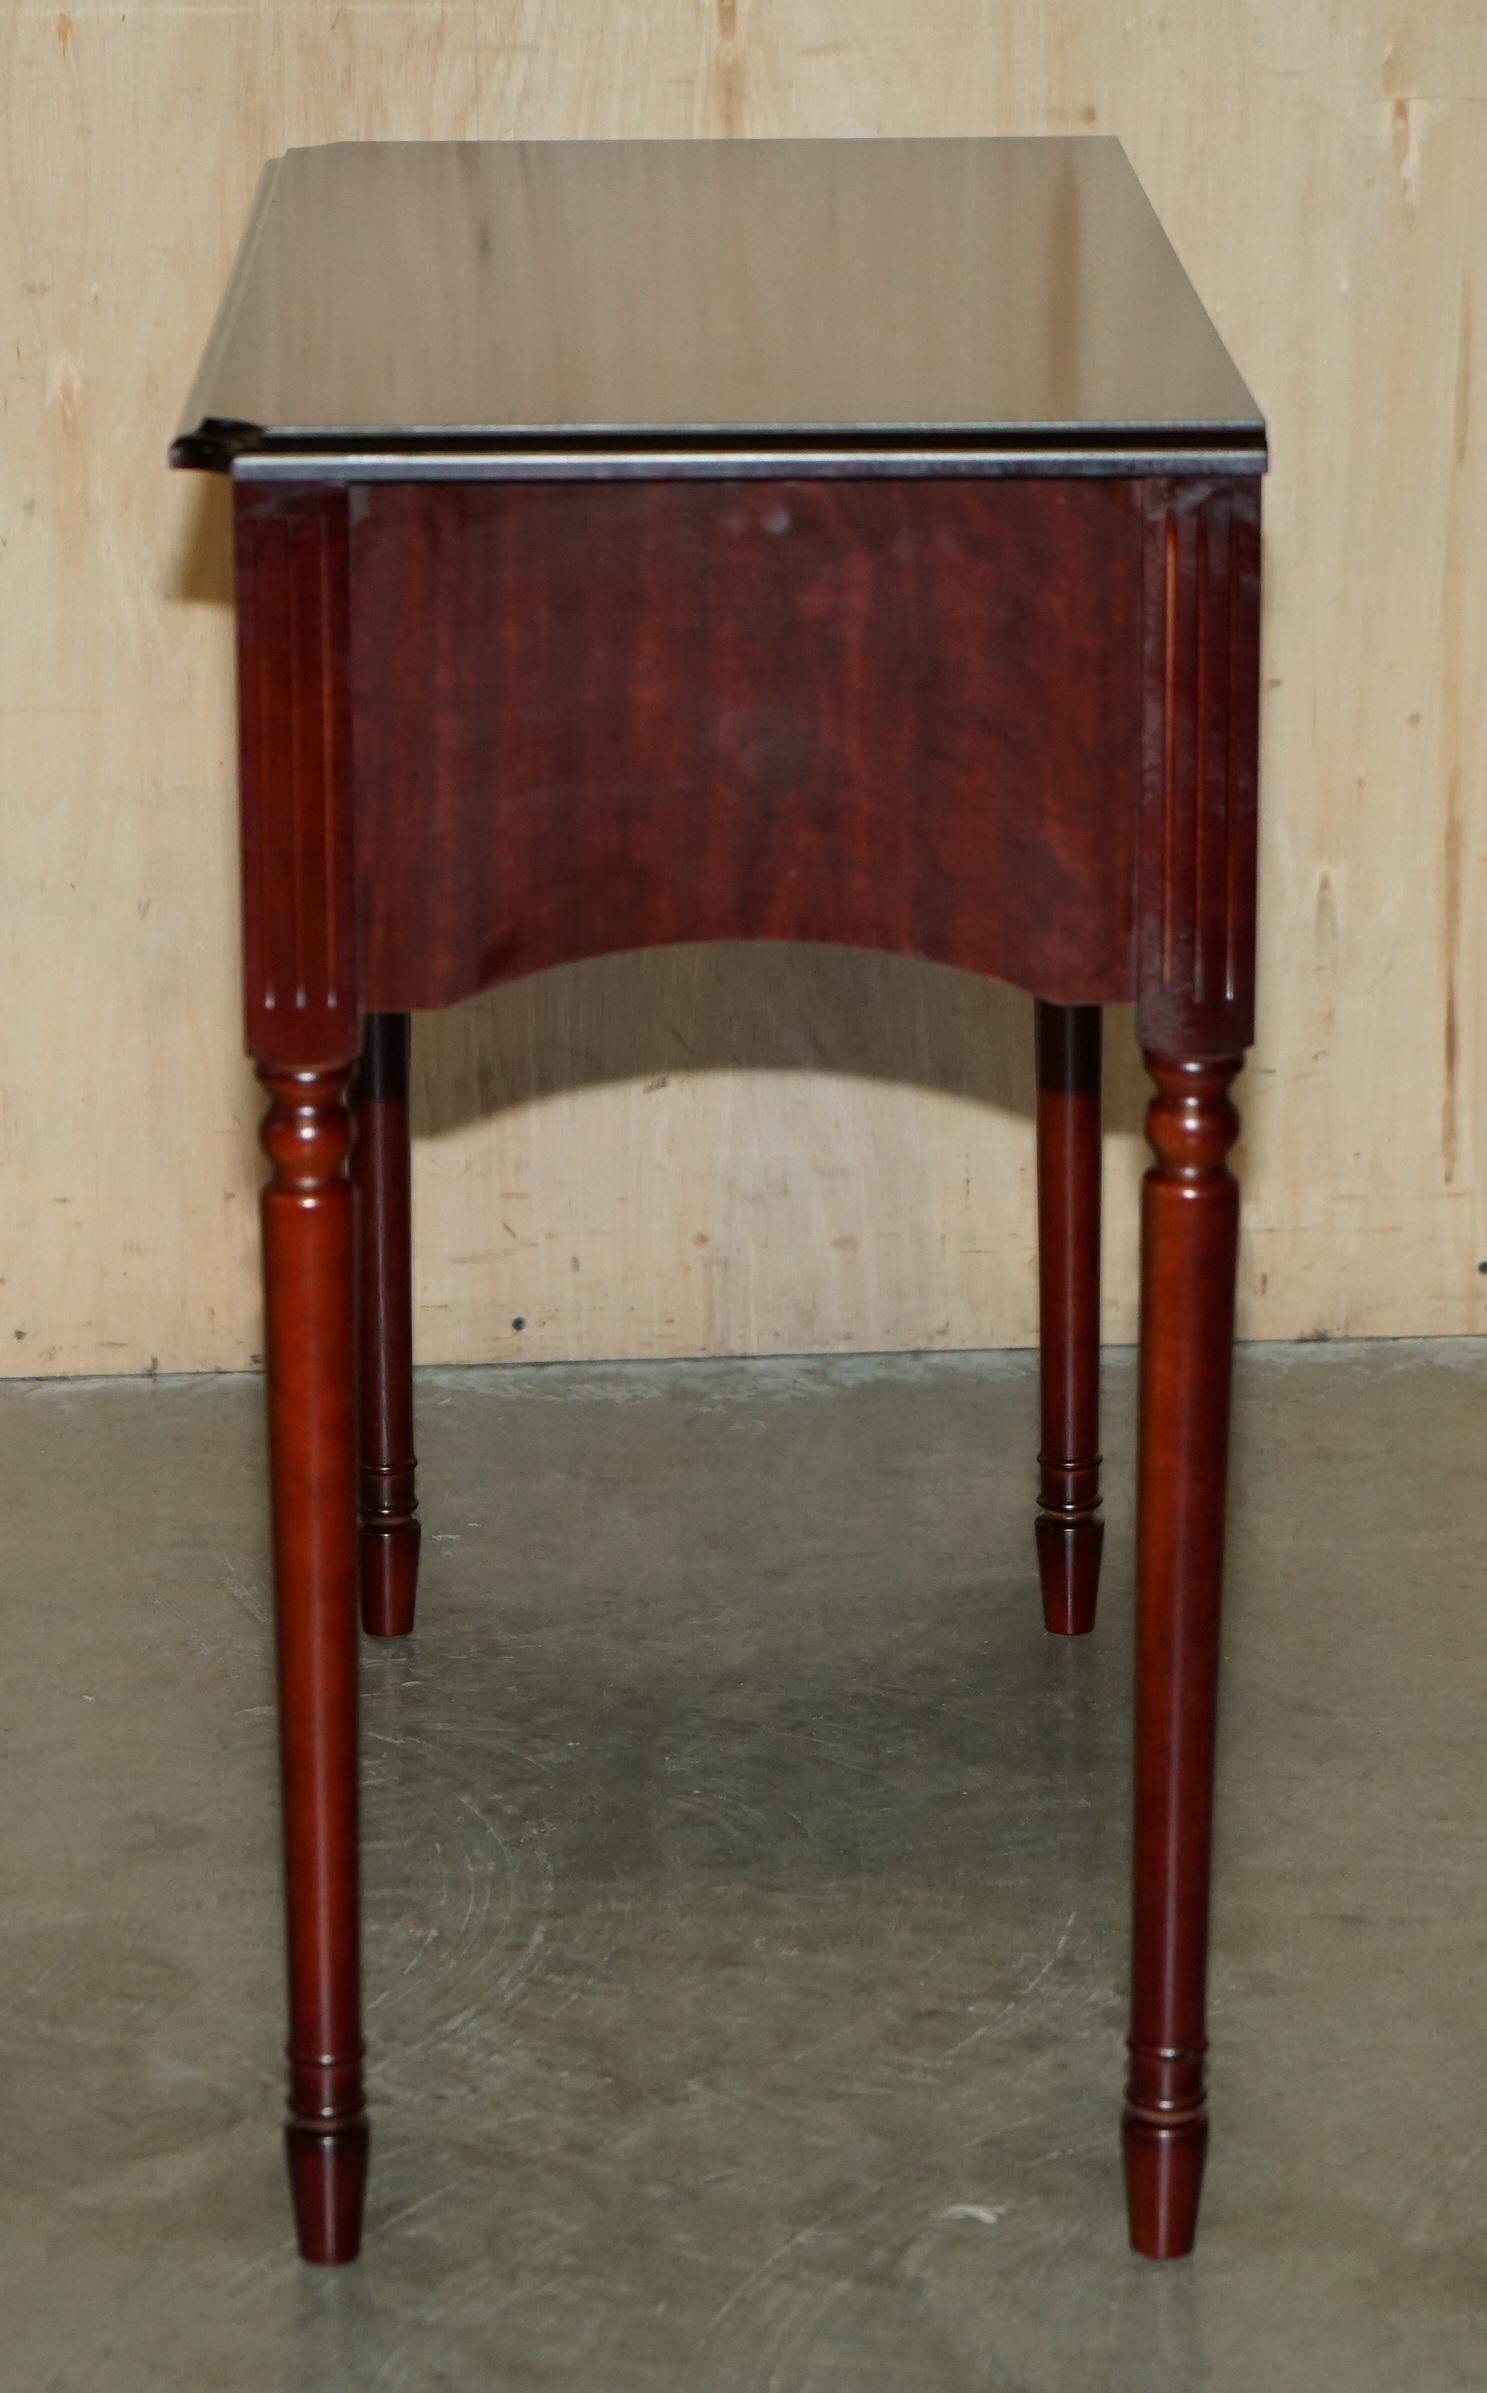 LOVELY SMALL TWO DRAWER SIDE CONSOLE TABLE MIT HARDWOOD  Style FINiSH im Angebot 6